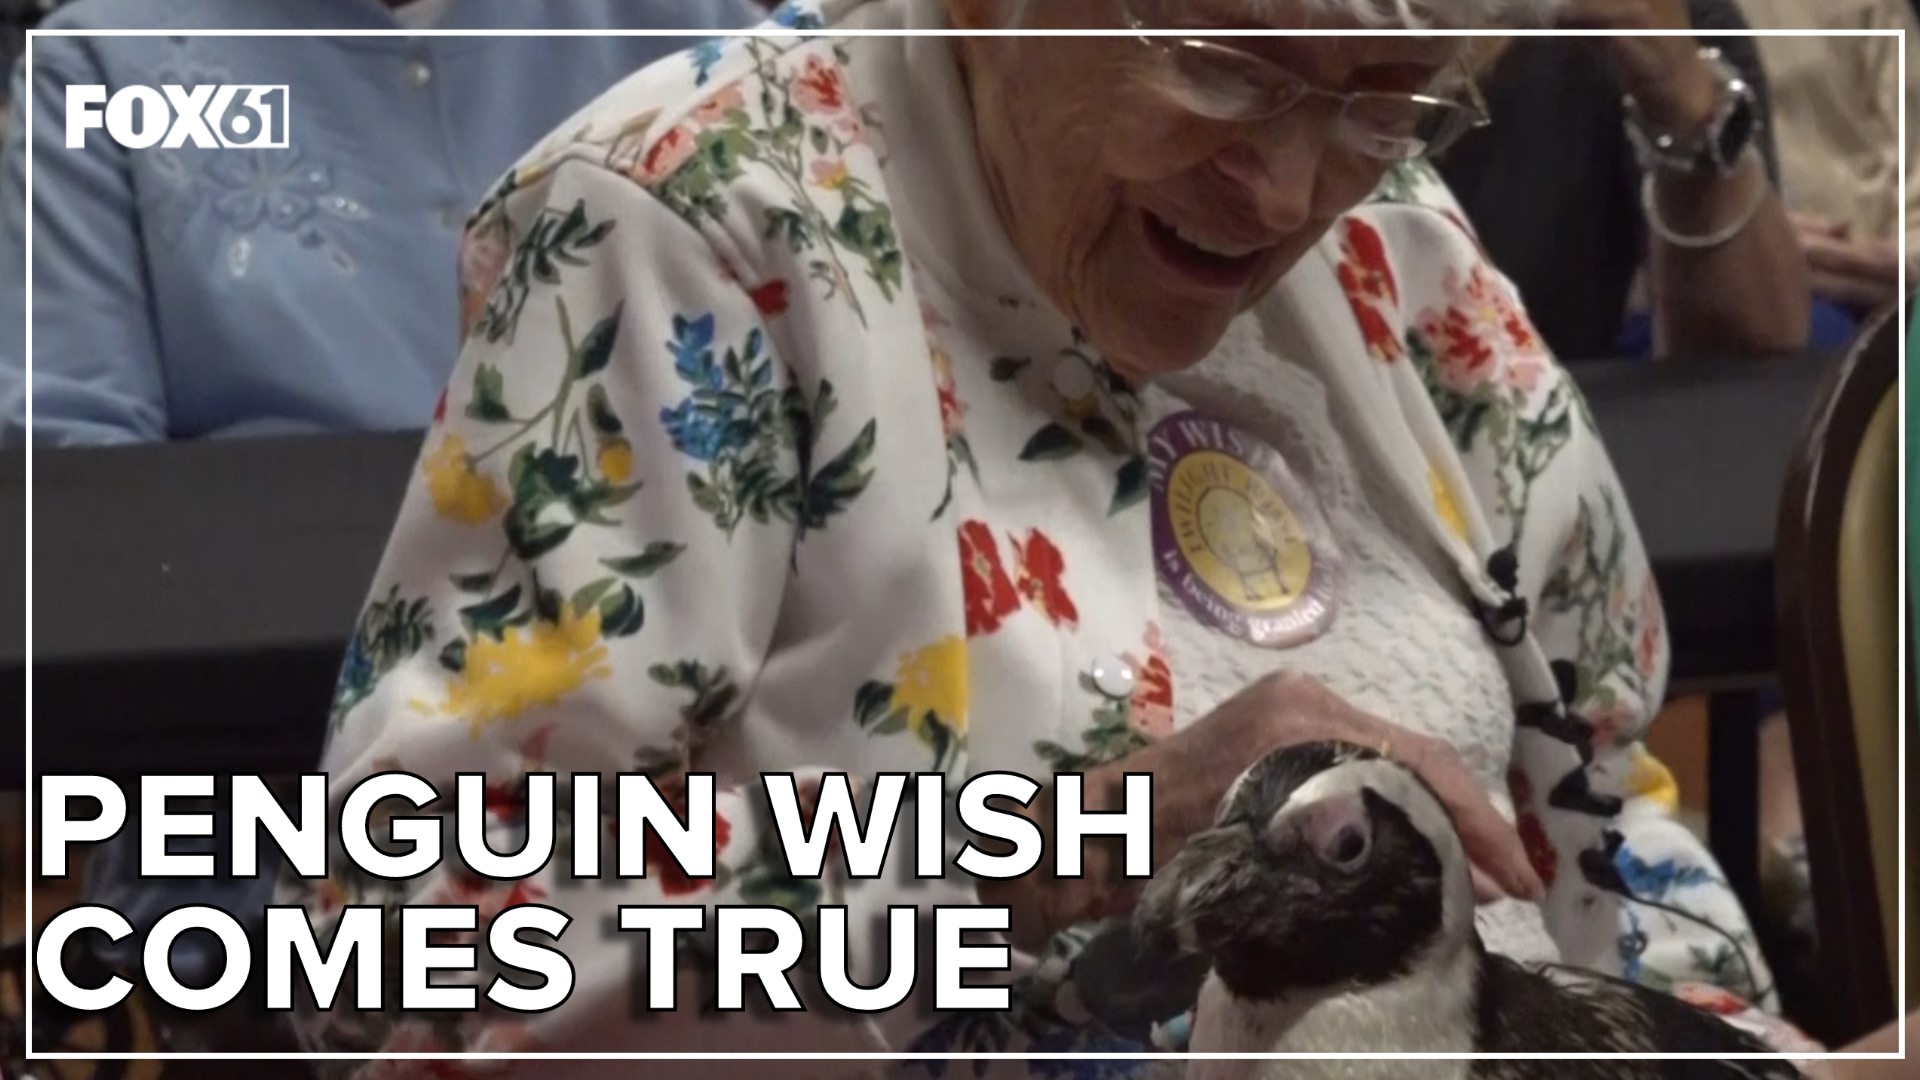 Mr. Red Green is the oldest penguin at Mystic Aquarium, and he surprised a 104-year-old Farmington woman, whose wish was to pet a penguin.